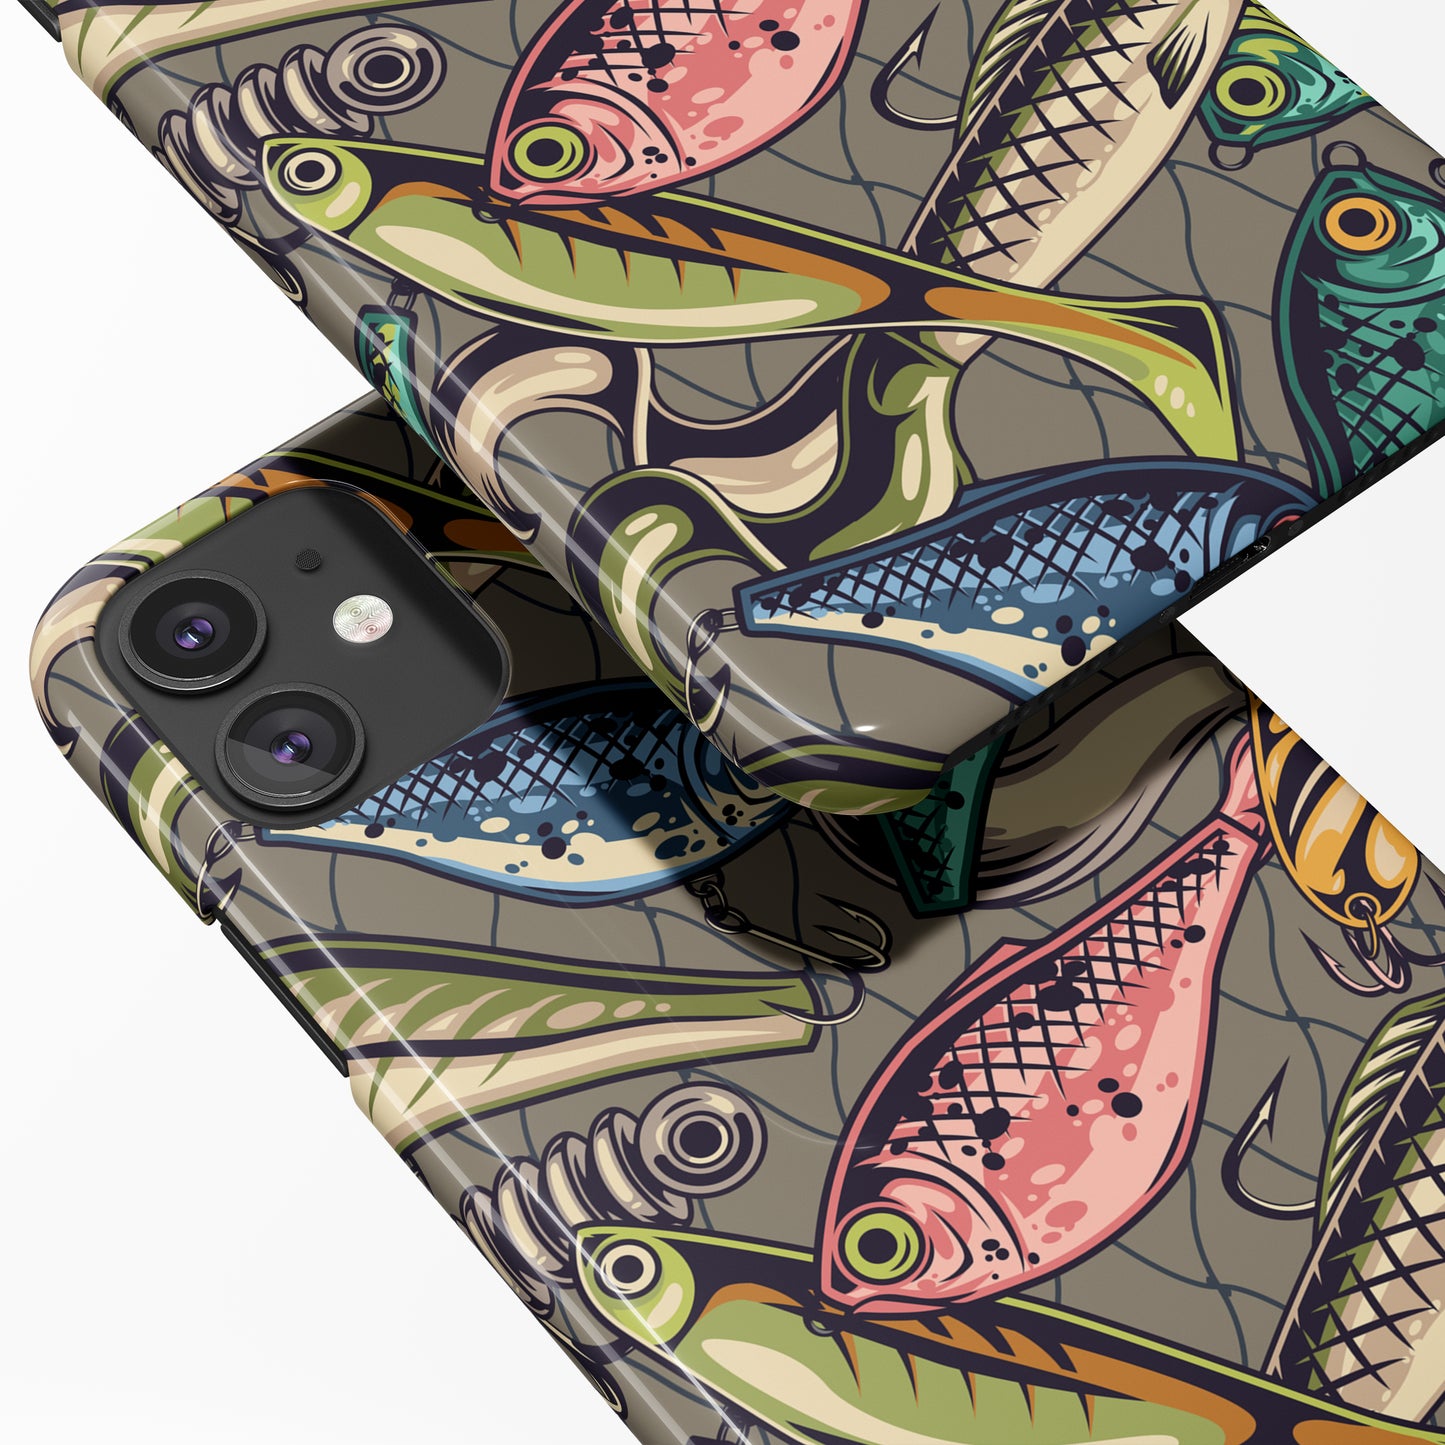 For Men Fishing iPhone Case